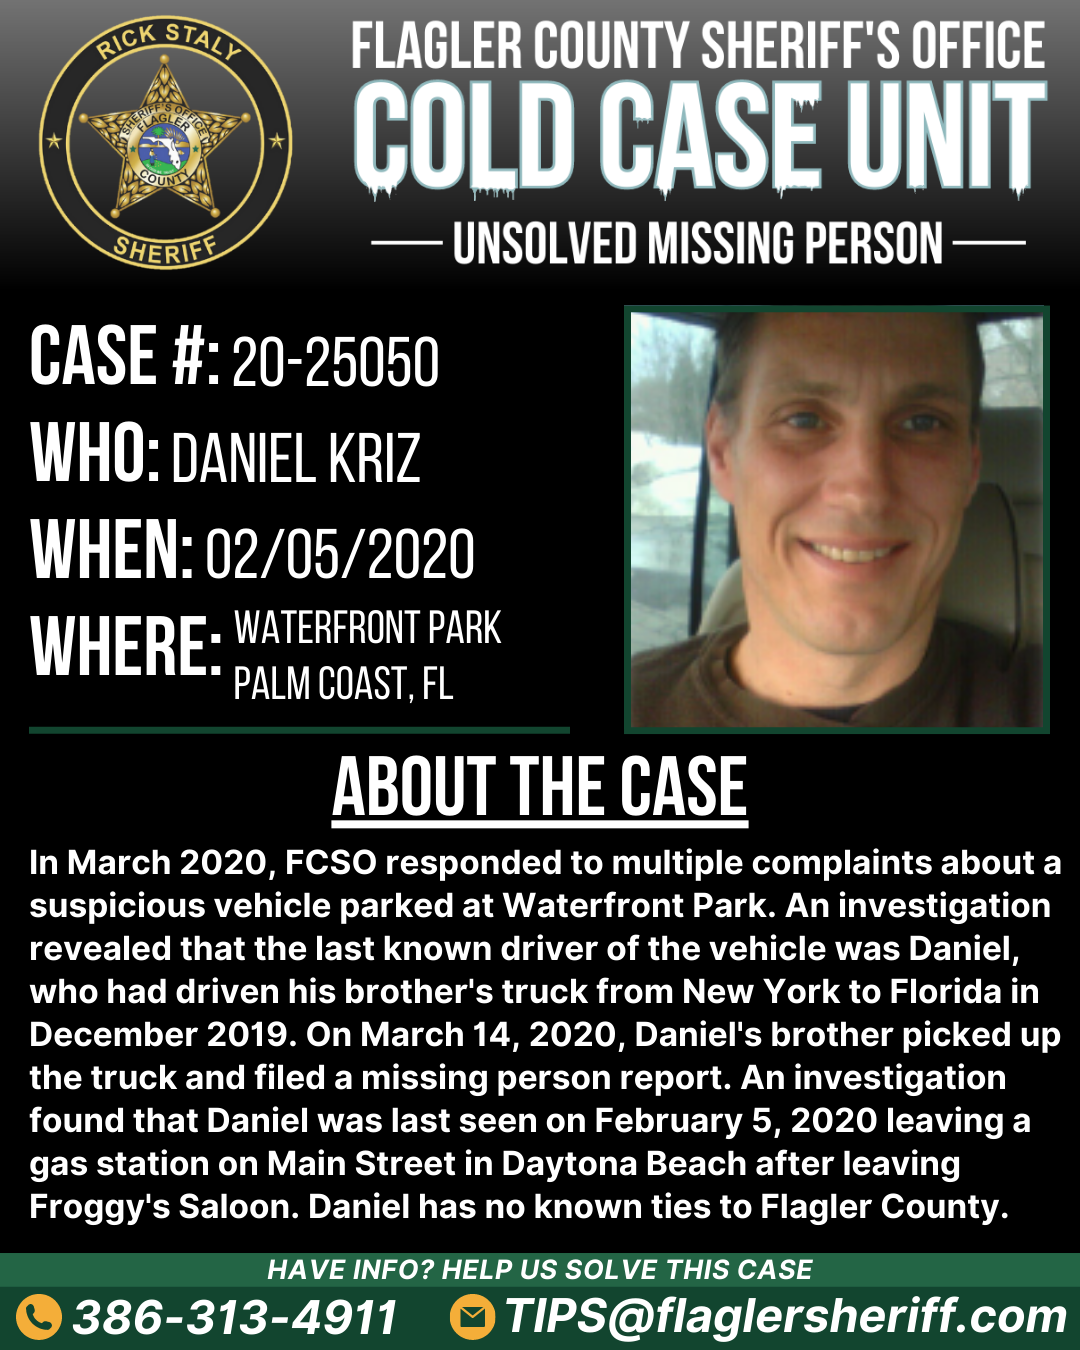 Case #20-25050. Missing Person. Who: Daniel Kriz. When: 02/05/2020. Where: Waterfront Park (Palm Coast, FL). About the case: In March 2020, FCSO responded to multiple complaints about a suspicious vehicle parked at Waterfront Park. An investigation revealed that the last known driver of the vehicle was Daniel, who had driven his brother's truck from New York to Florida in December 2019. On March 14, 2020, Daniel's brother picked up the truck and filed a missing person report. An investigation found that Daniel was last seen on February 5, 2020 leaving a gas station on Main Street in Daytona Beach after leaving Froggy's Saloon. Daniel has no known ties to Flagler County.